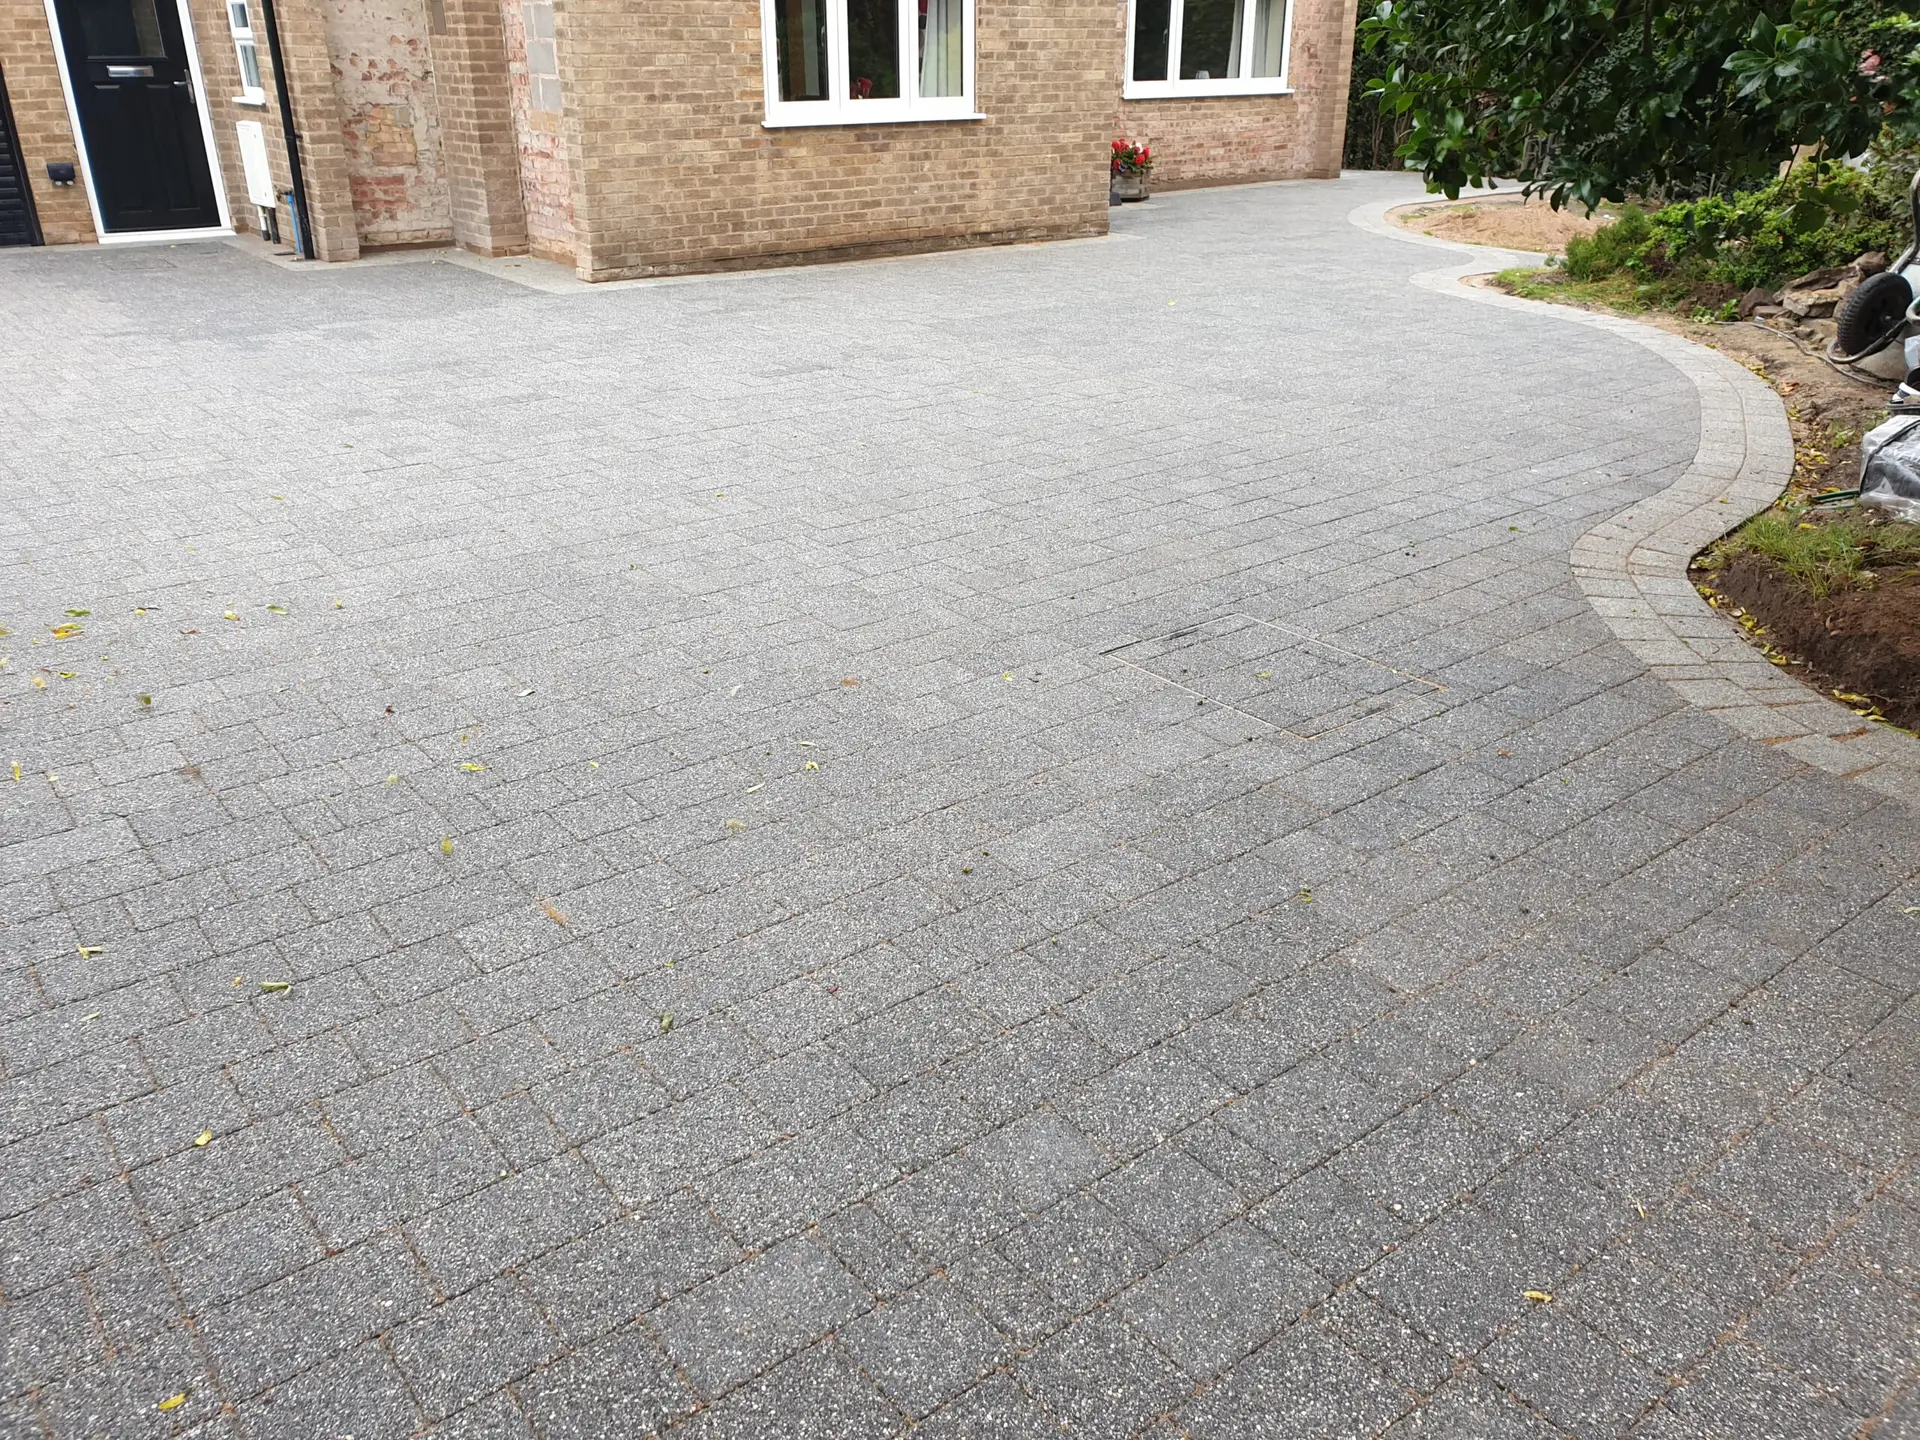 Curved block paved driveway leading to a residential home in Nottingham, showcasing the expert installation and seamless integration into the property landscape.